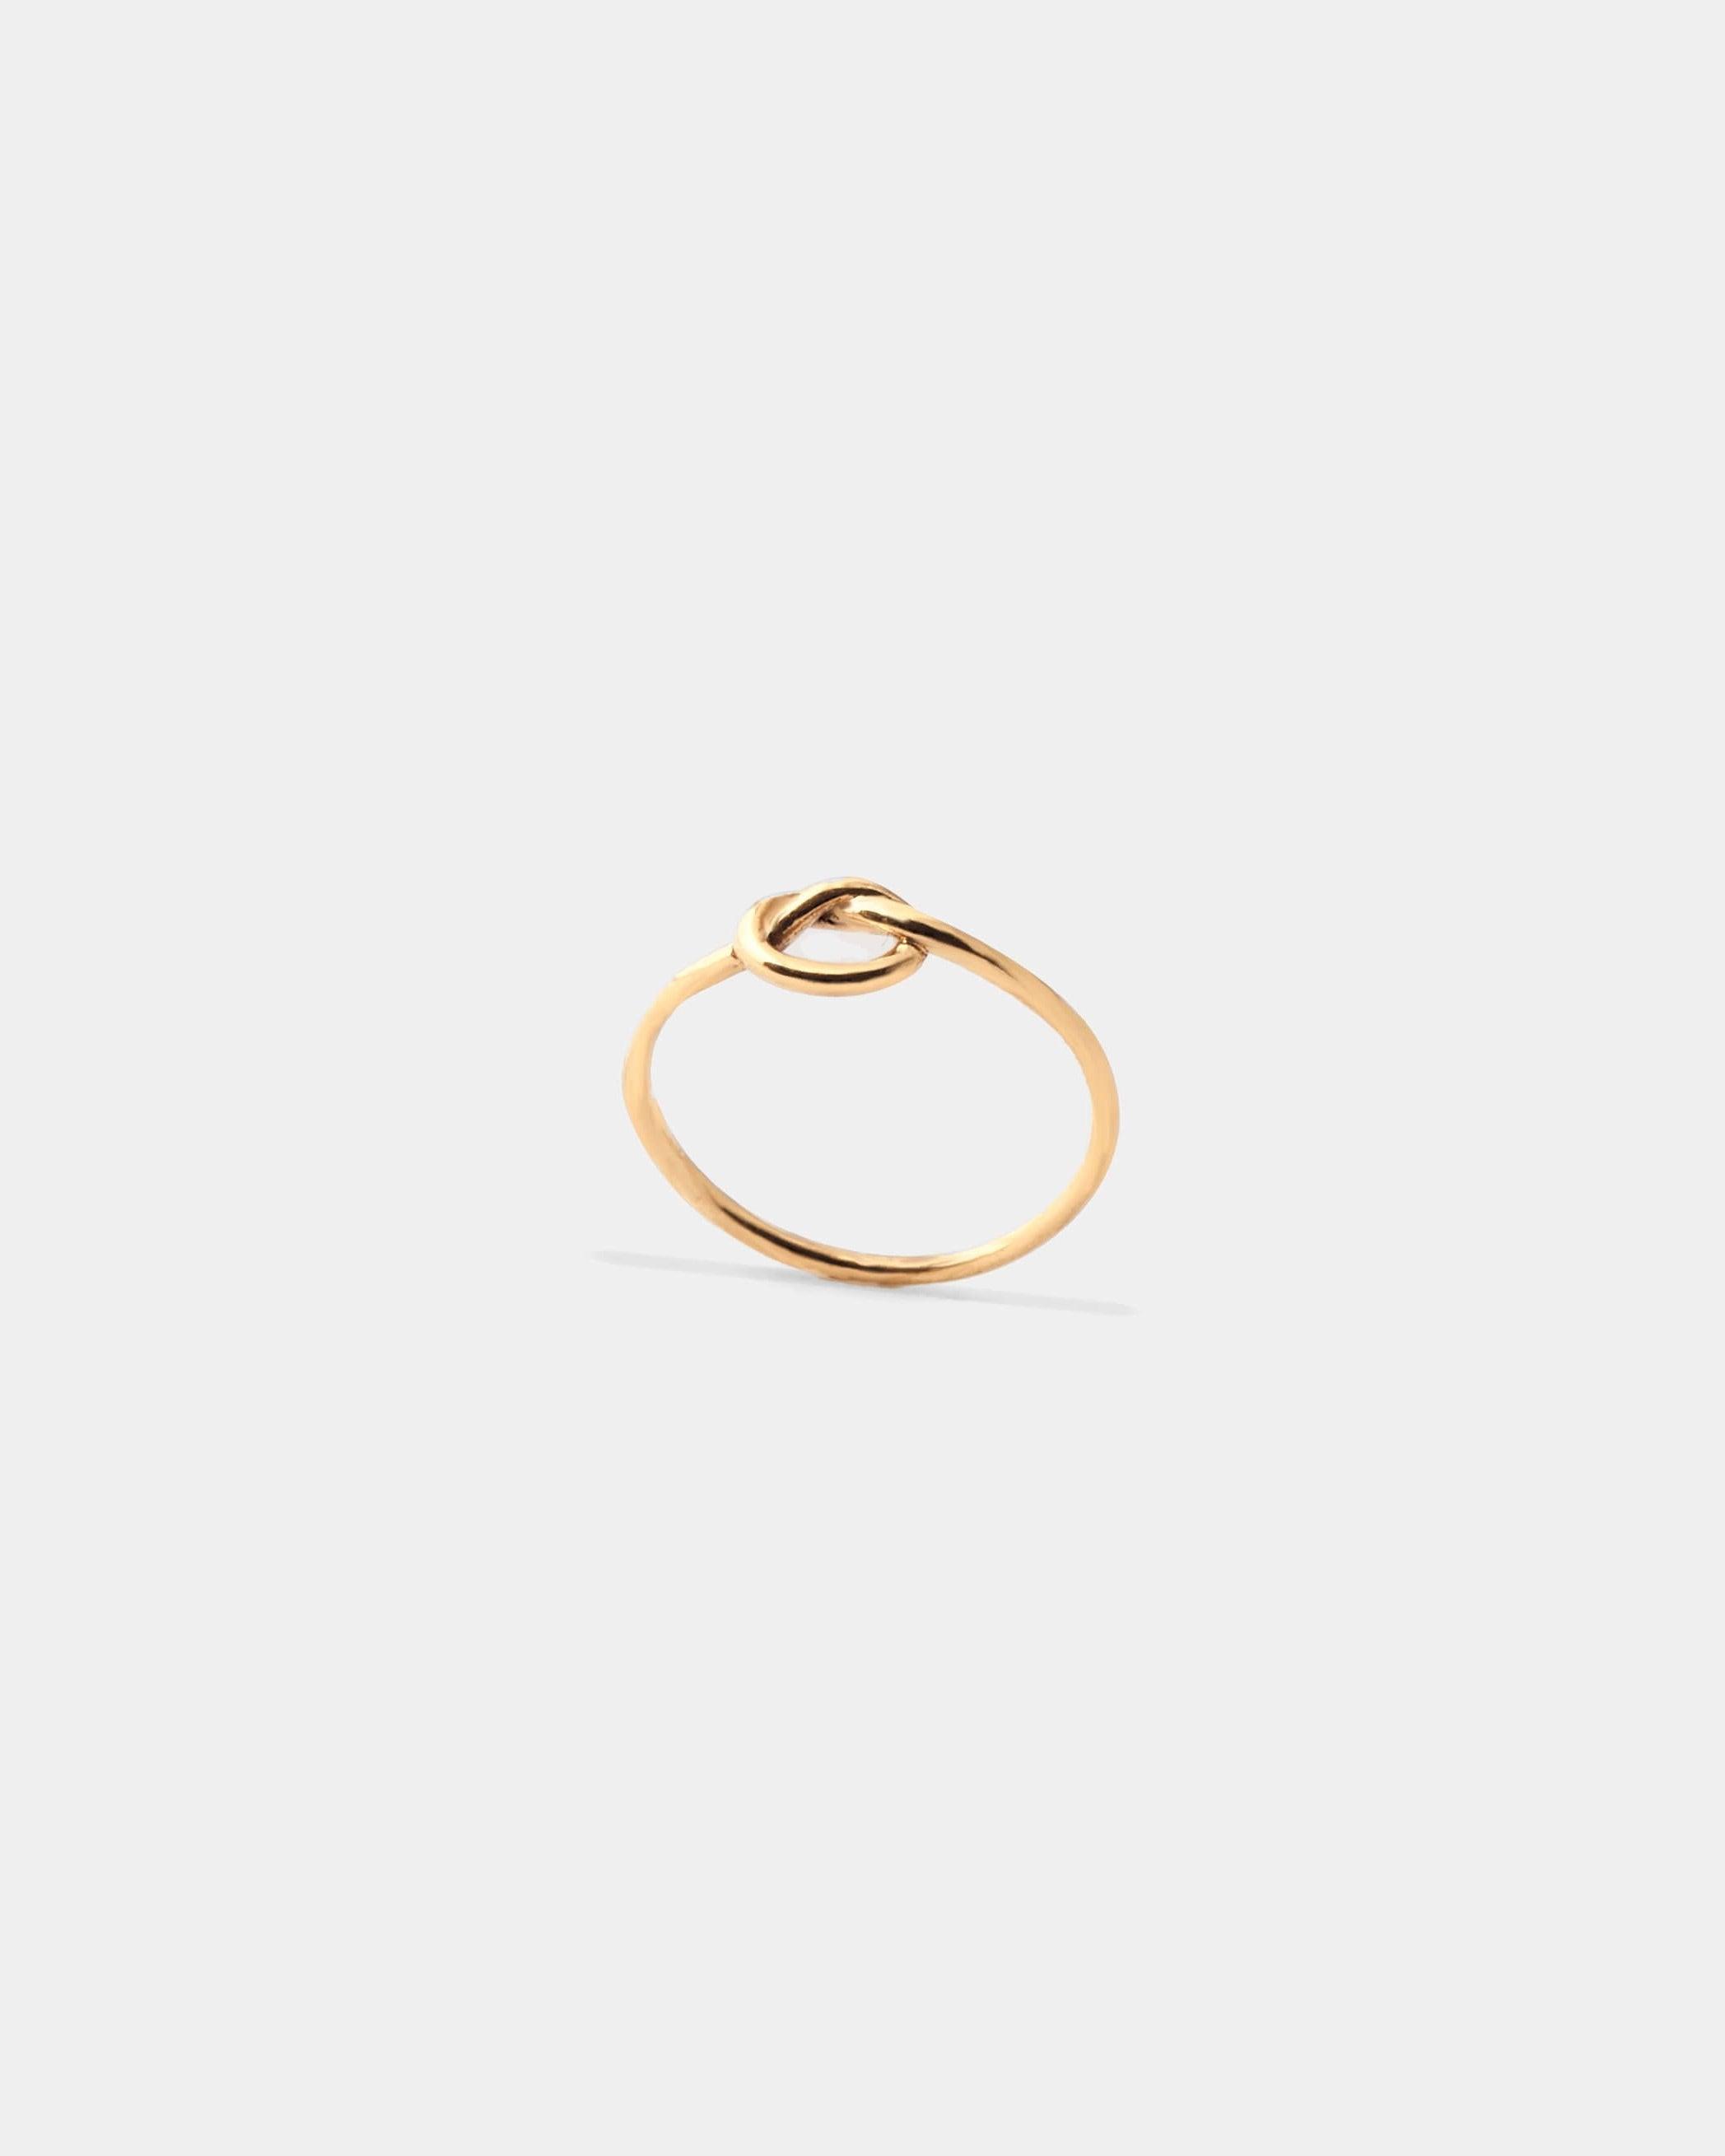 SLIM KNOT RING - LIMELY